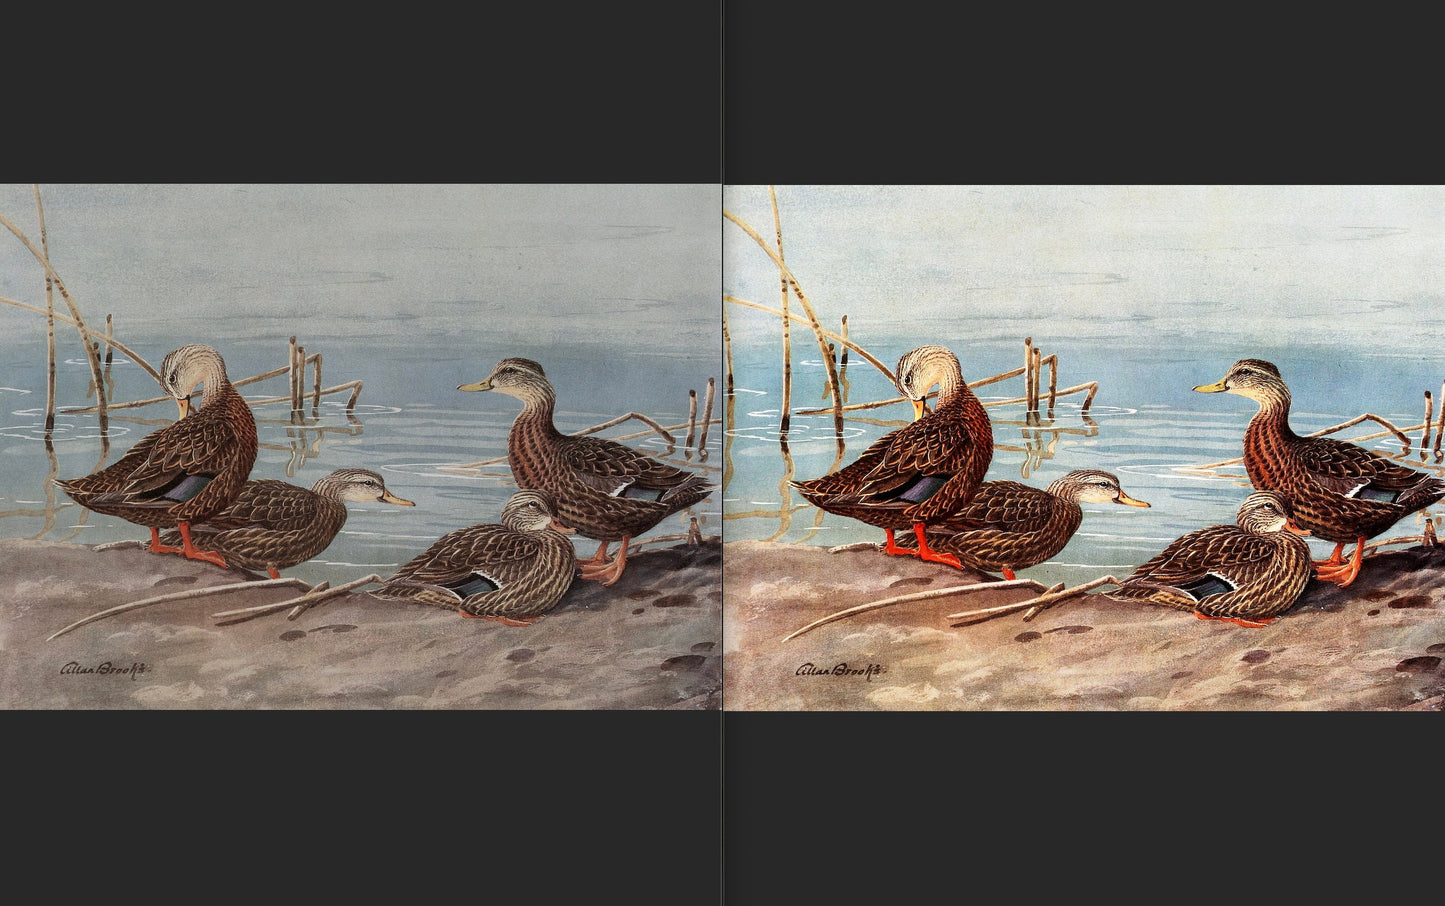 The Natural History of the Ducks [51 Images]